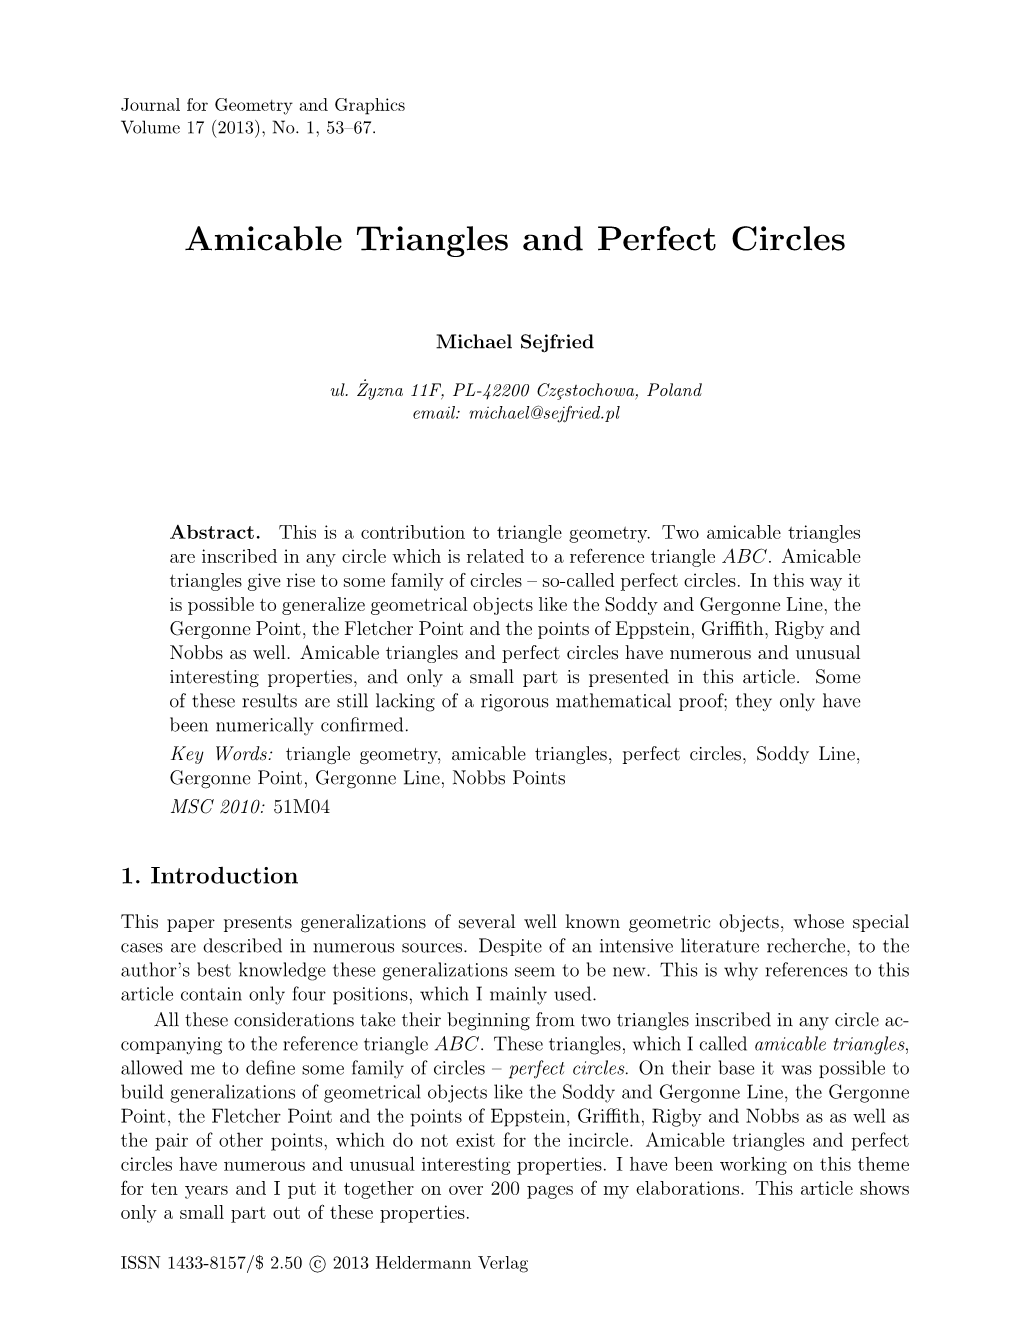 Amicable Triangles and Perfect Circles